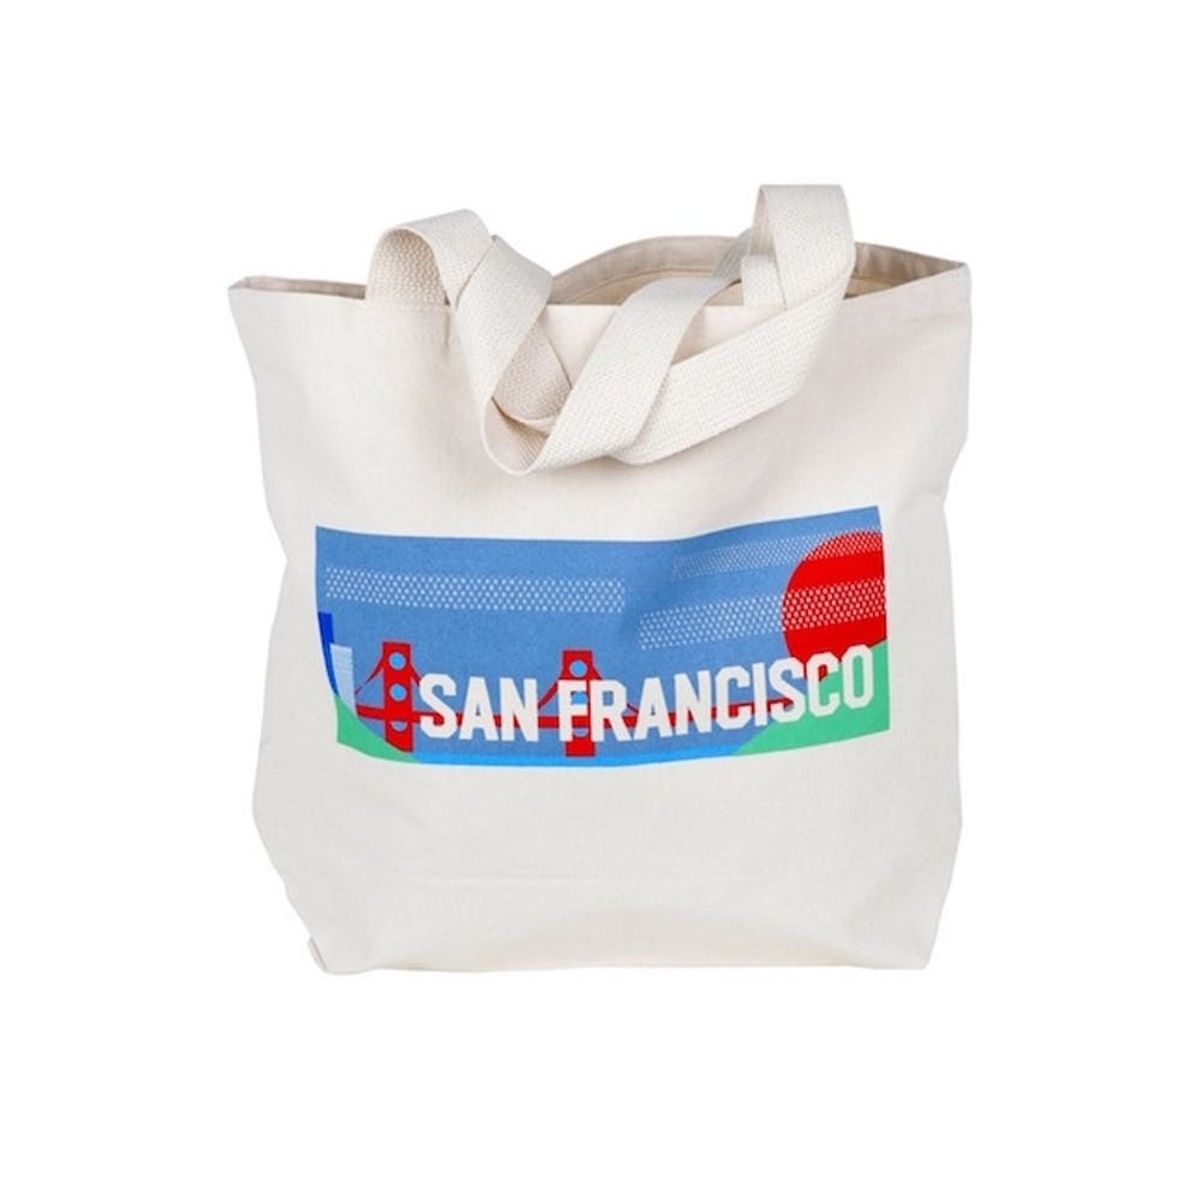 You’ll Totally Get Carried Away by These 12 Versatile Totes